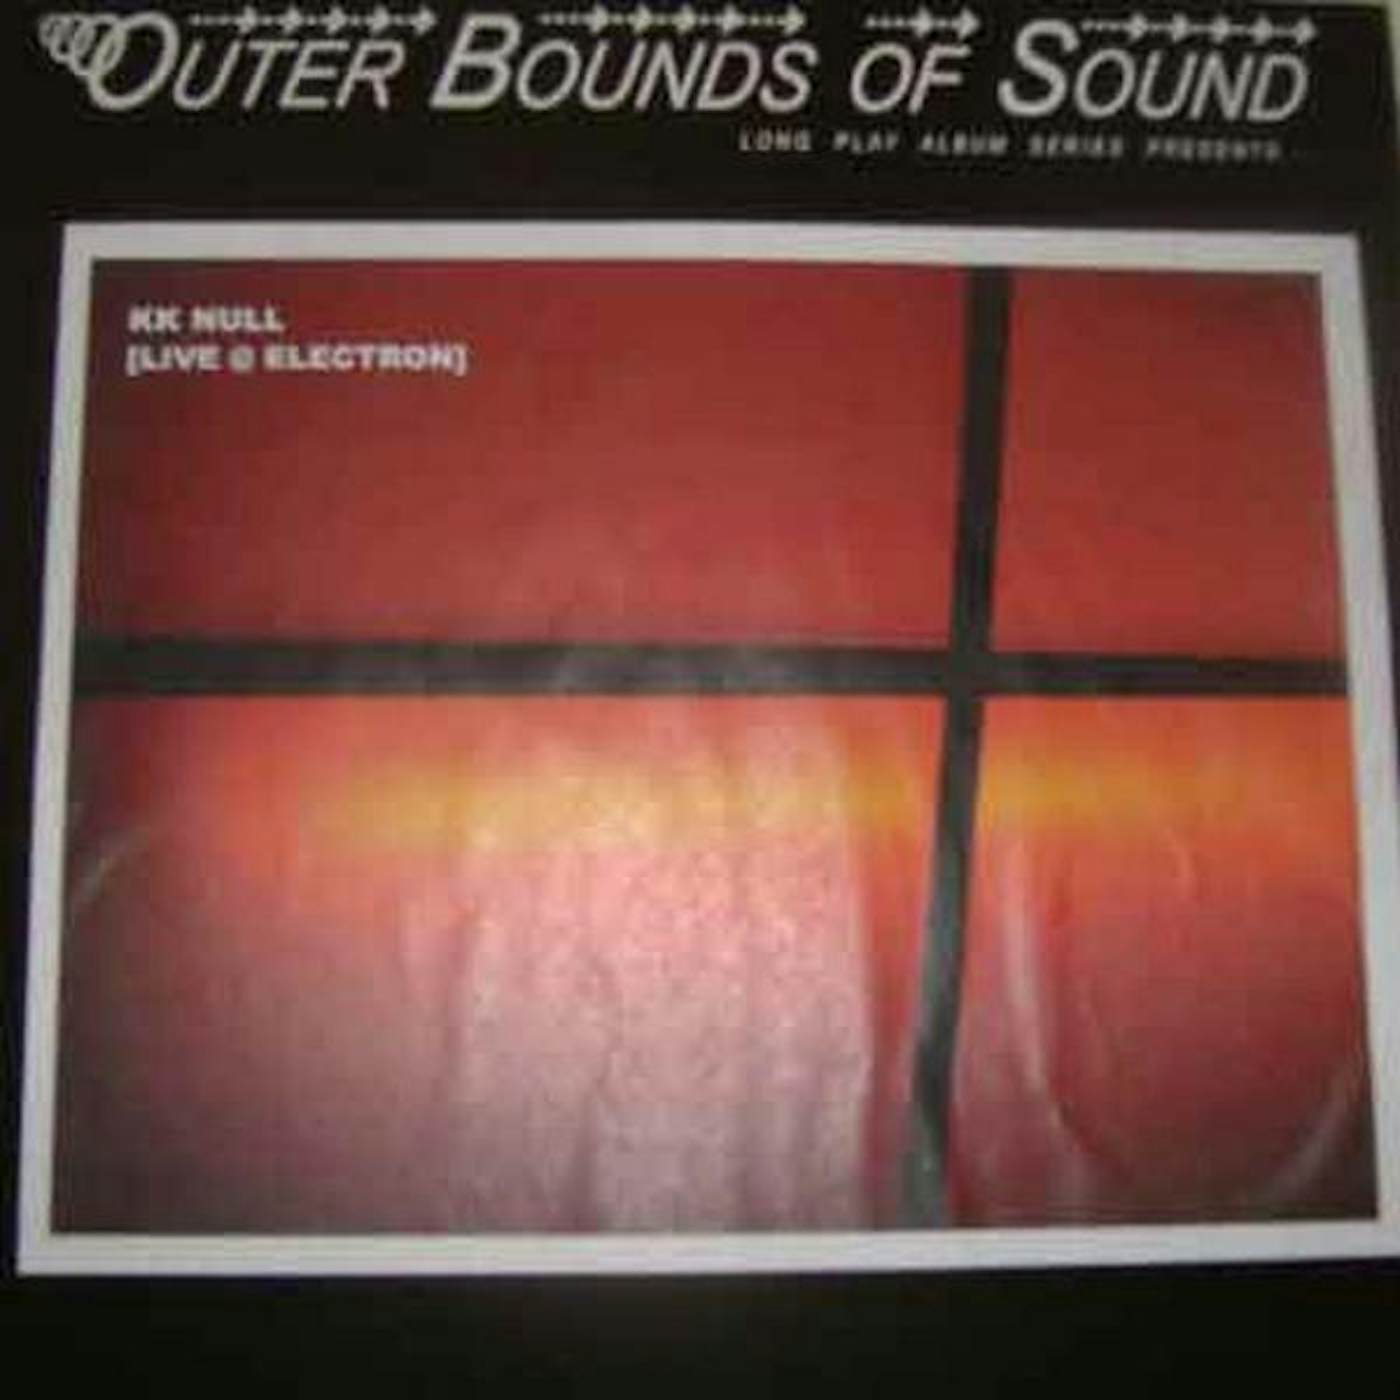 KK Null Outer Bounds Of Sound Vinyl Record